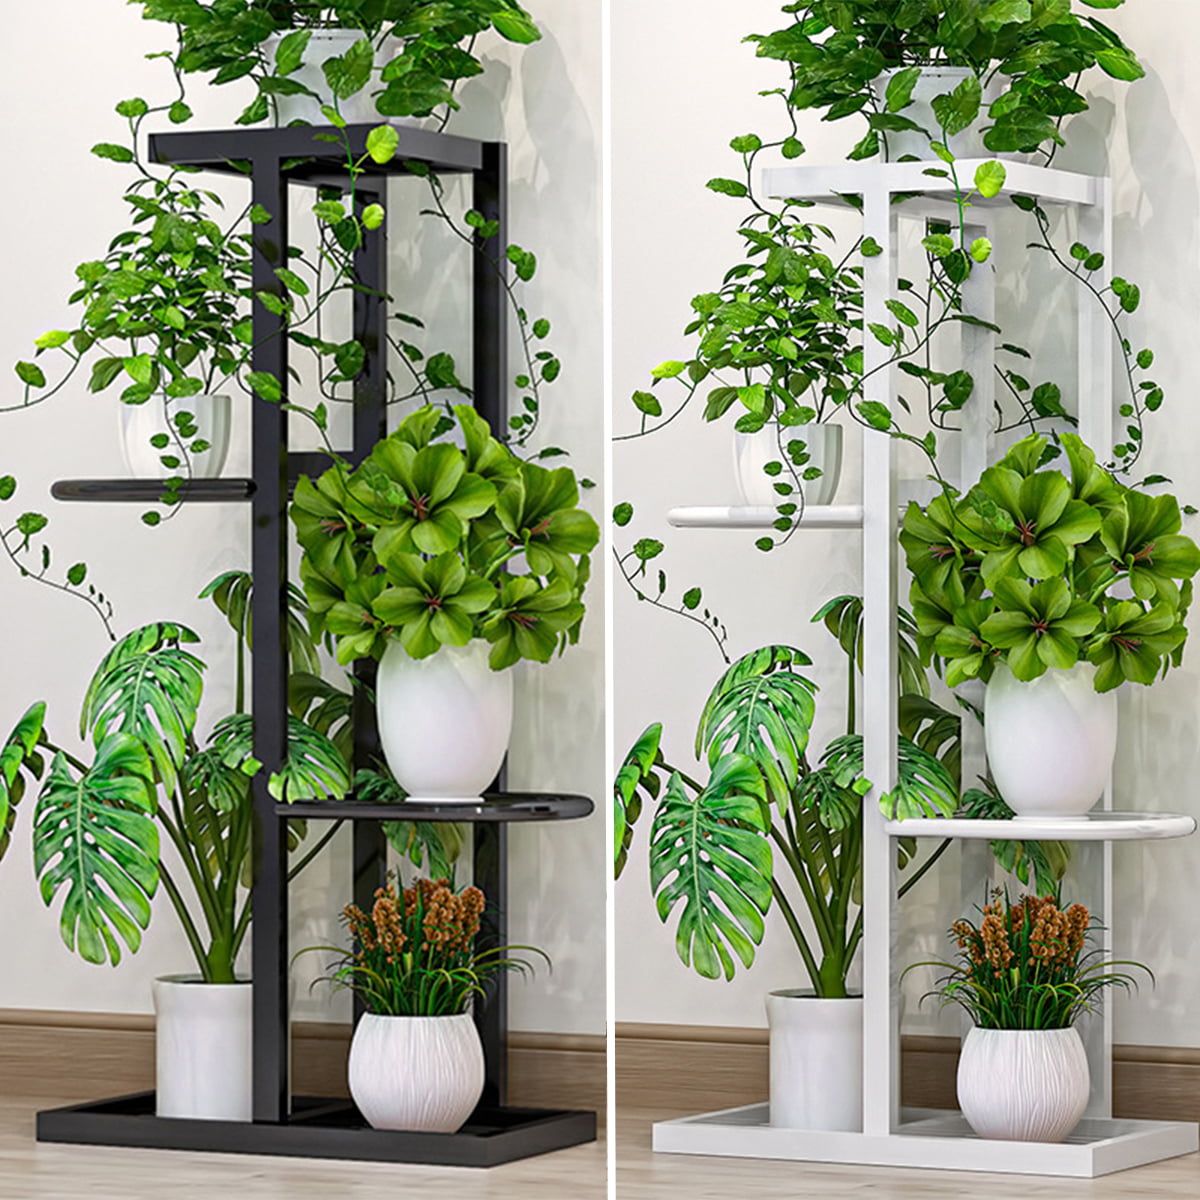 32 Inches Tall 4 Tier Multifunction Plant Flower Stand Flower Pot Display  Rack Dcorative Stand Garden Outdoor Indoor Decor – Walmart For 32 Inch Plant Stands (View 6 of 15)